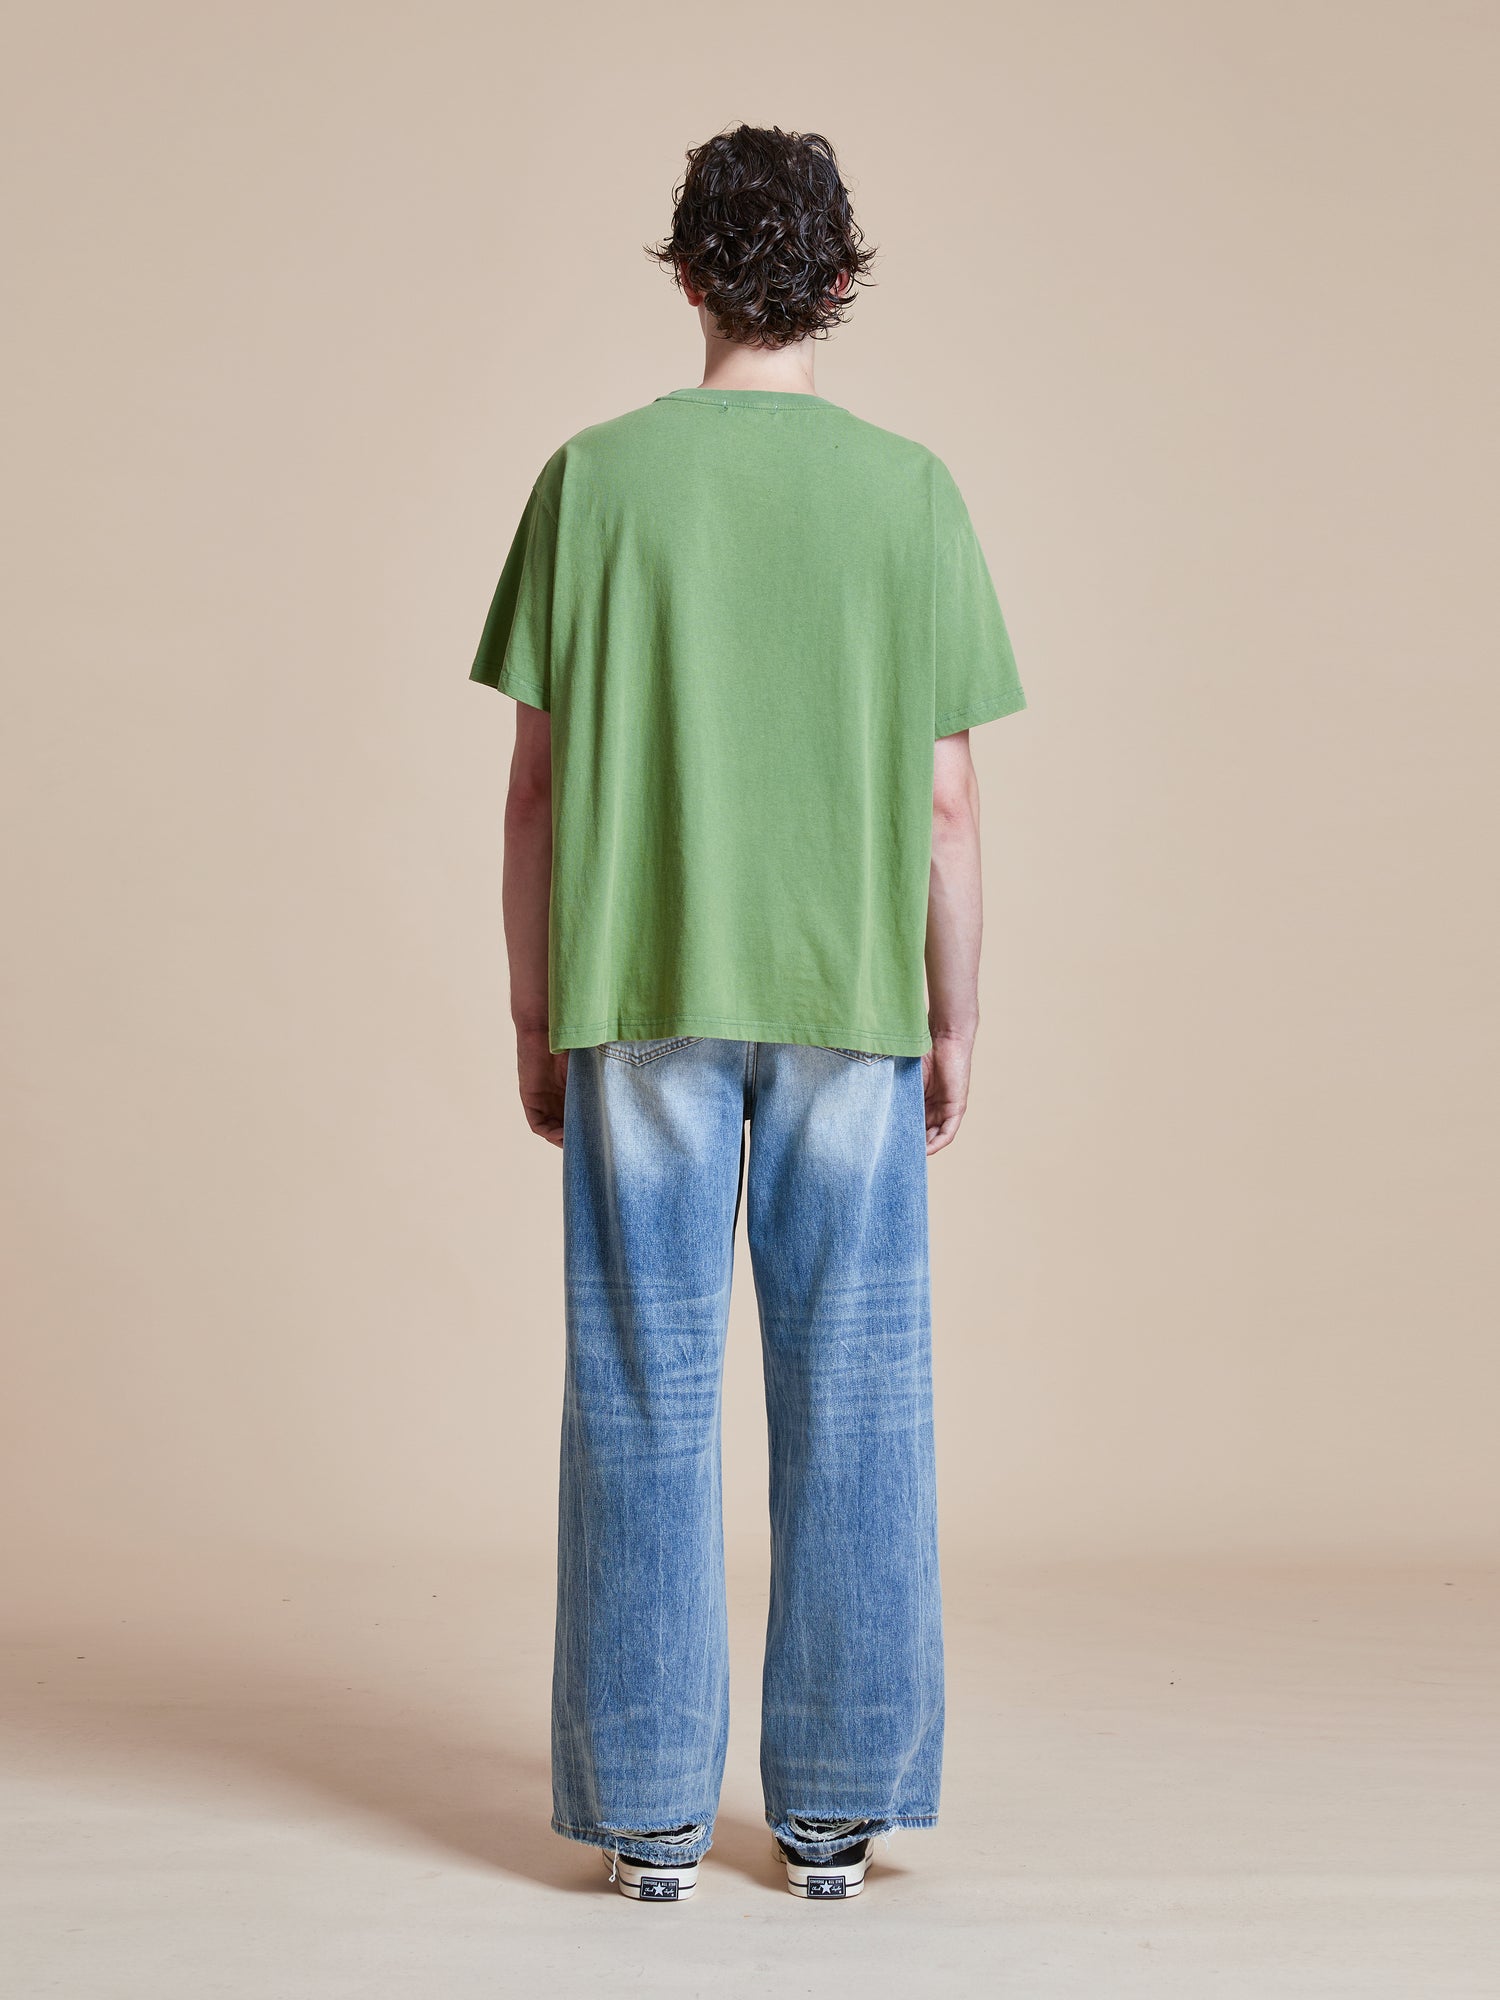 The back view of a man wearing a Pine Needle Farm Tee by Found and blue jeans.